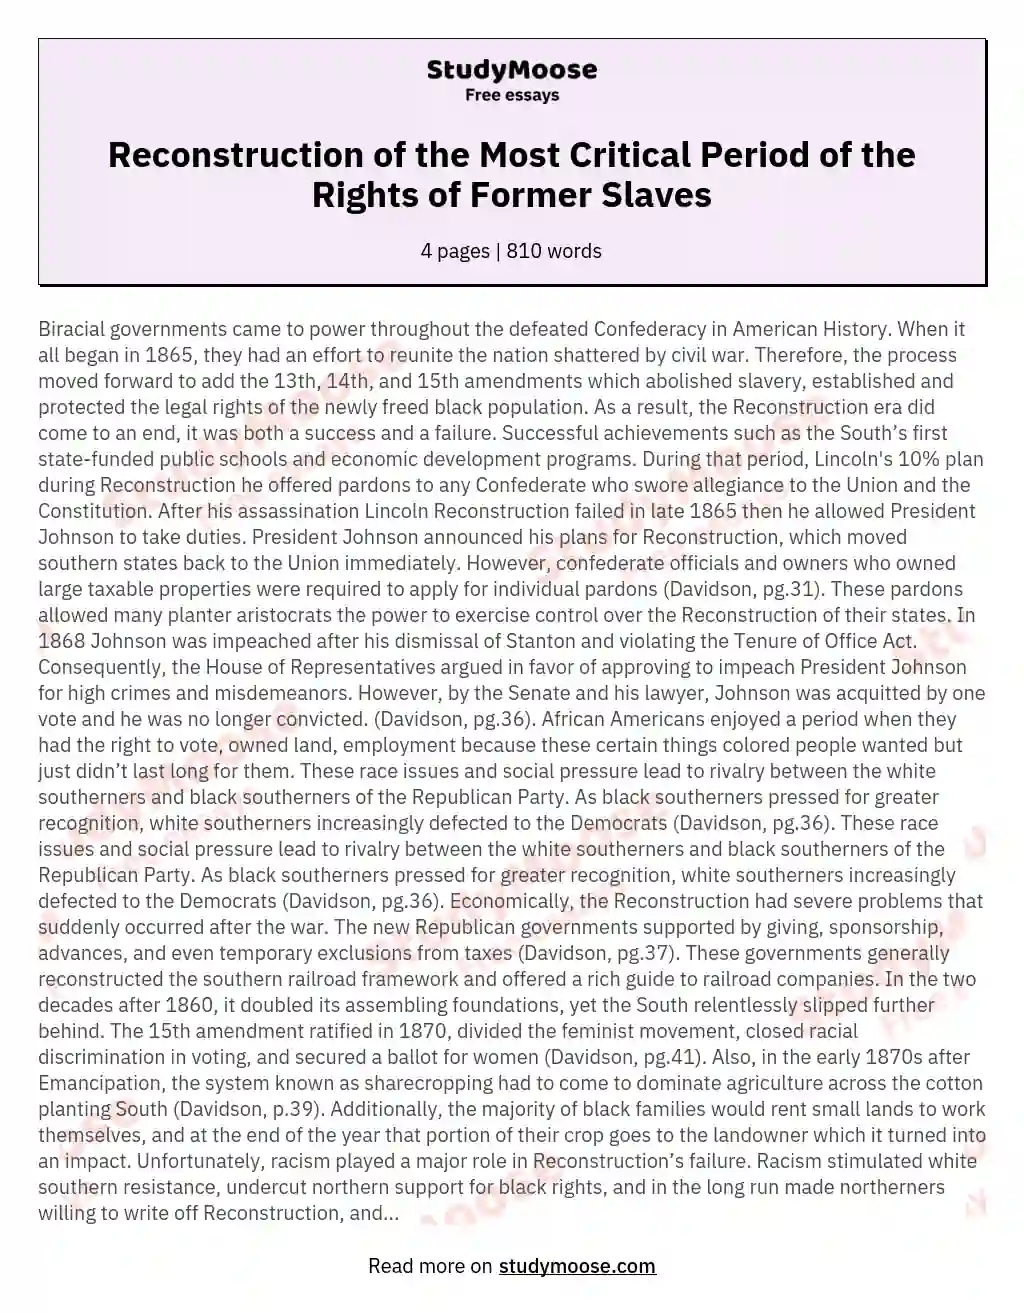 Reconstruction of the Most Critical Period of the Rights of Former Slaves essay